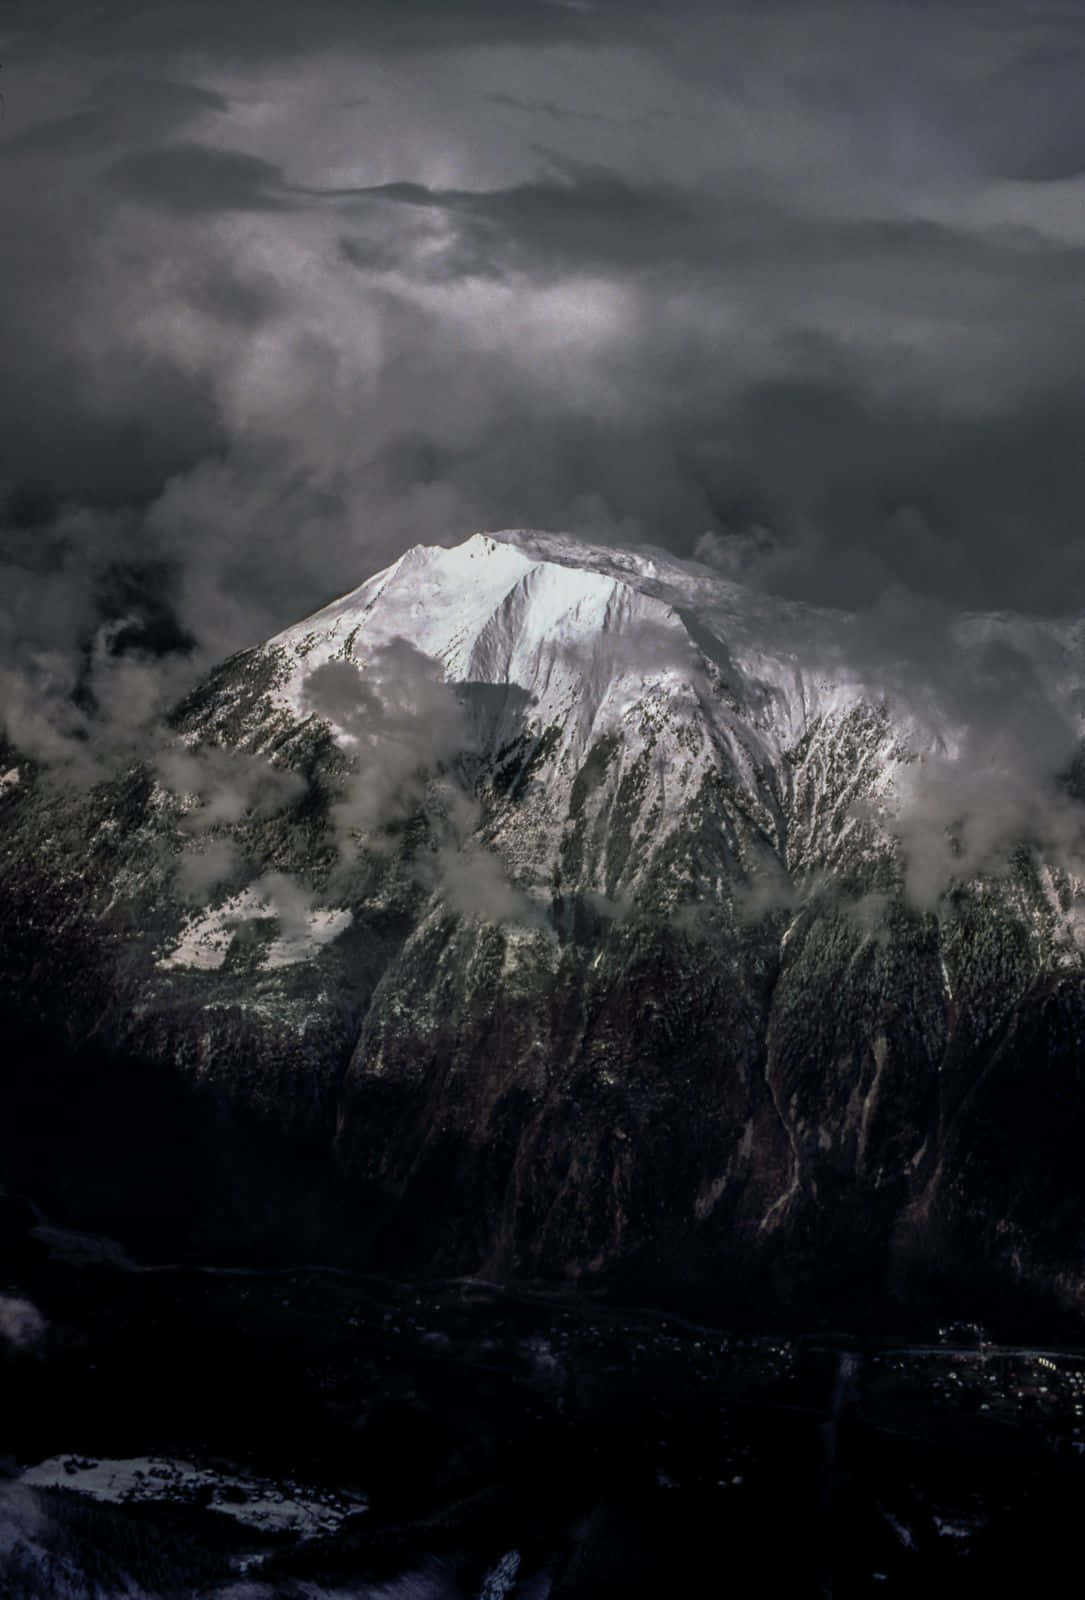 Black Clouds Shrouding The Mountain Wallpaper